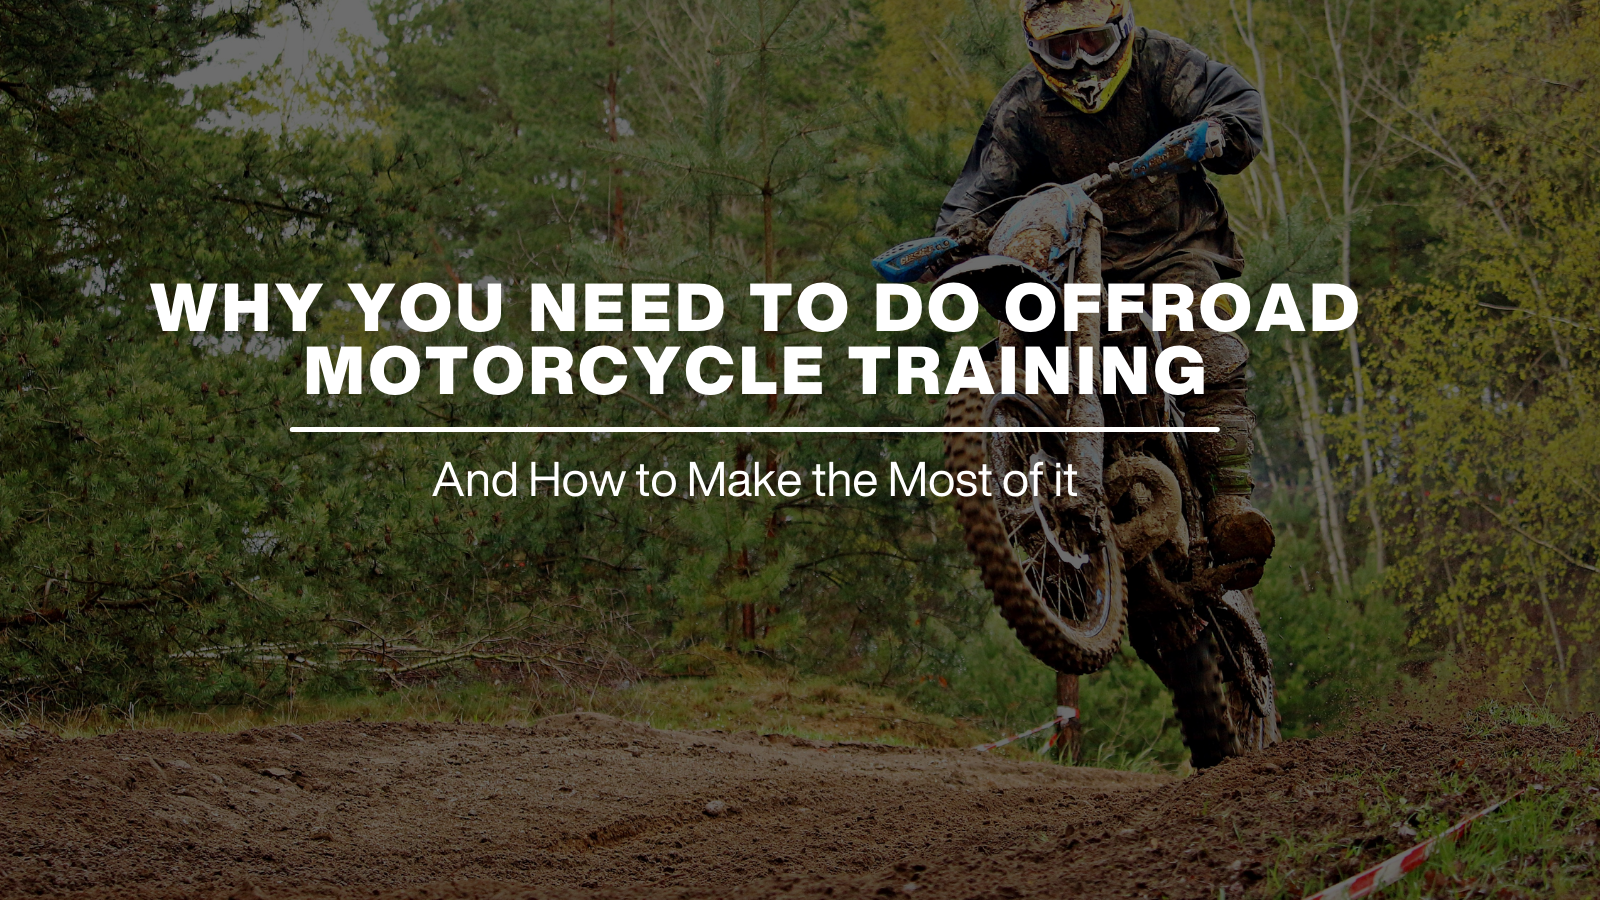 WHY YOU NEED TO DO OFFROAD MOTORCYCLE TRAINING